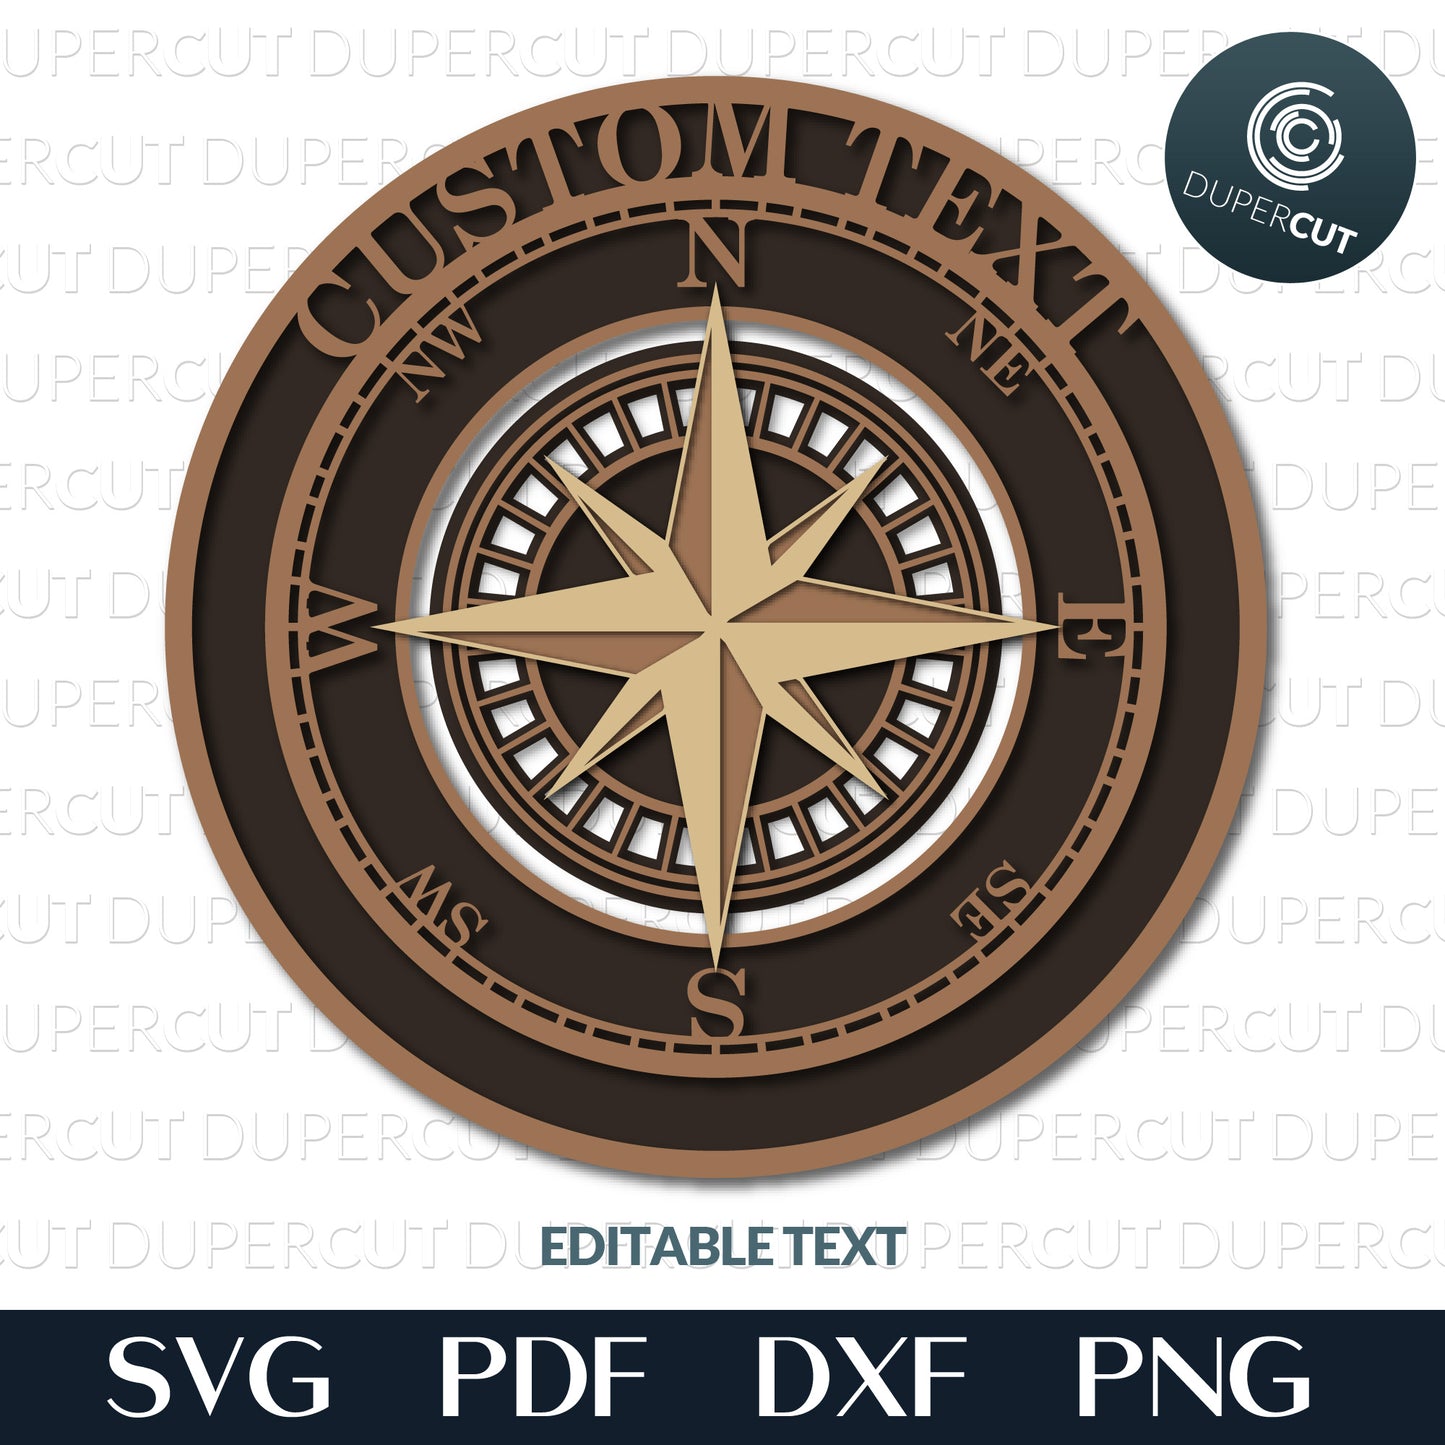 Layered compass with custom text, SVG PNG DXF files for cutting, laser engraving, scrapbooking. For use with Cricut, Glowforge, Silhouette, CNC machines.